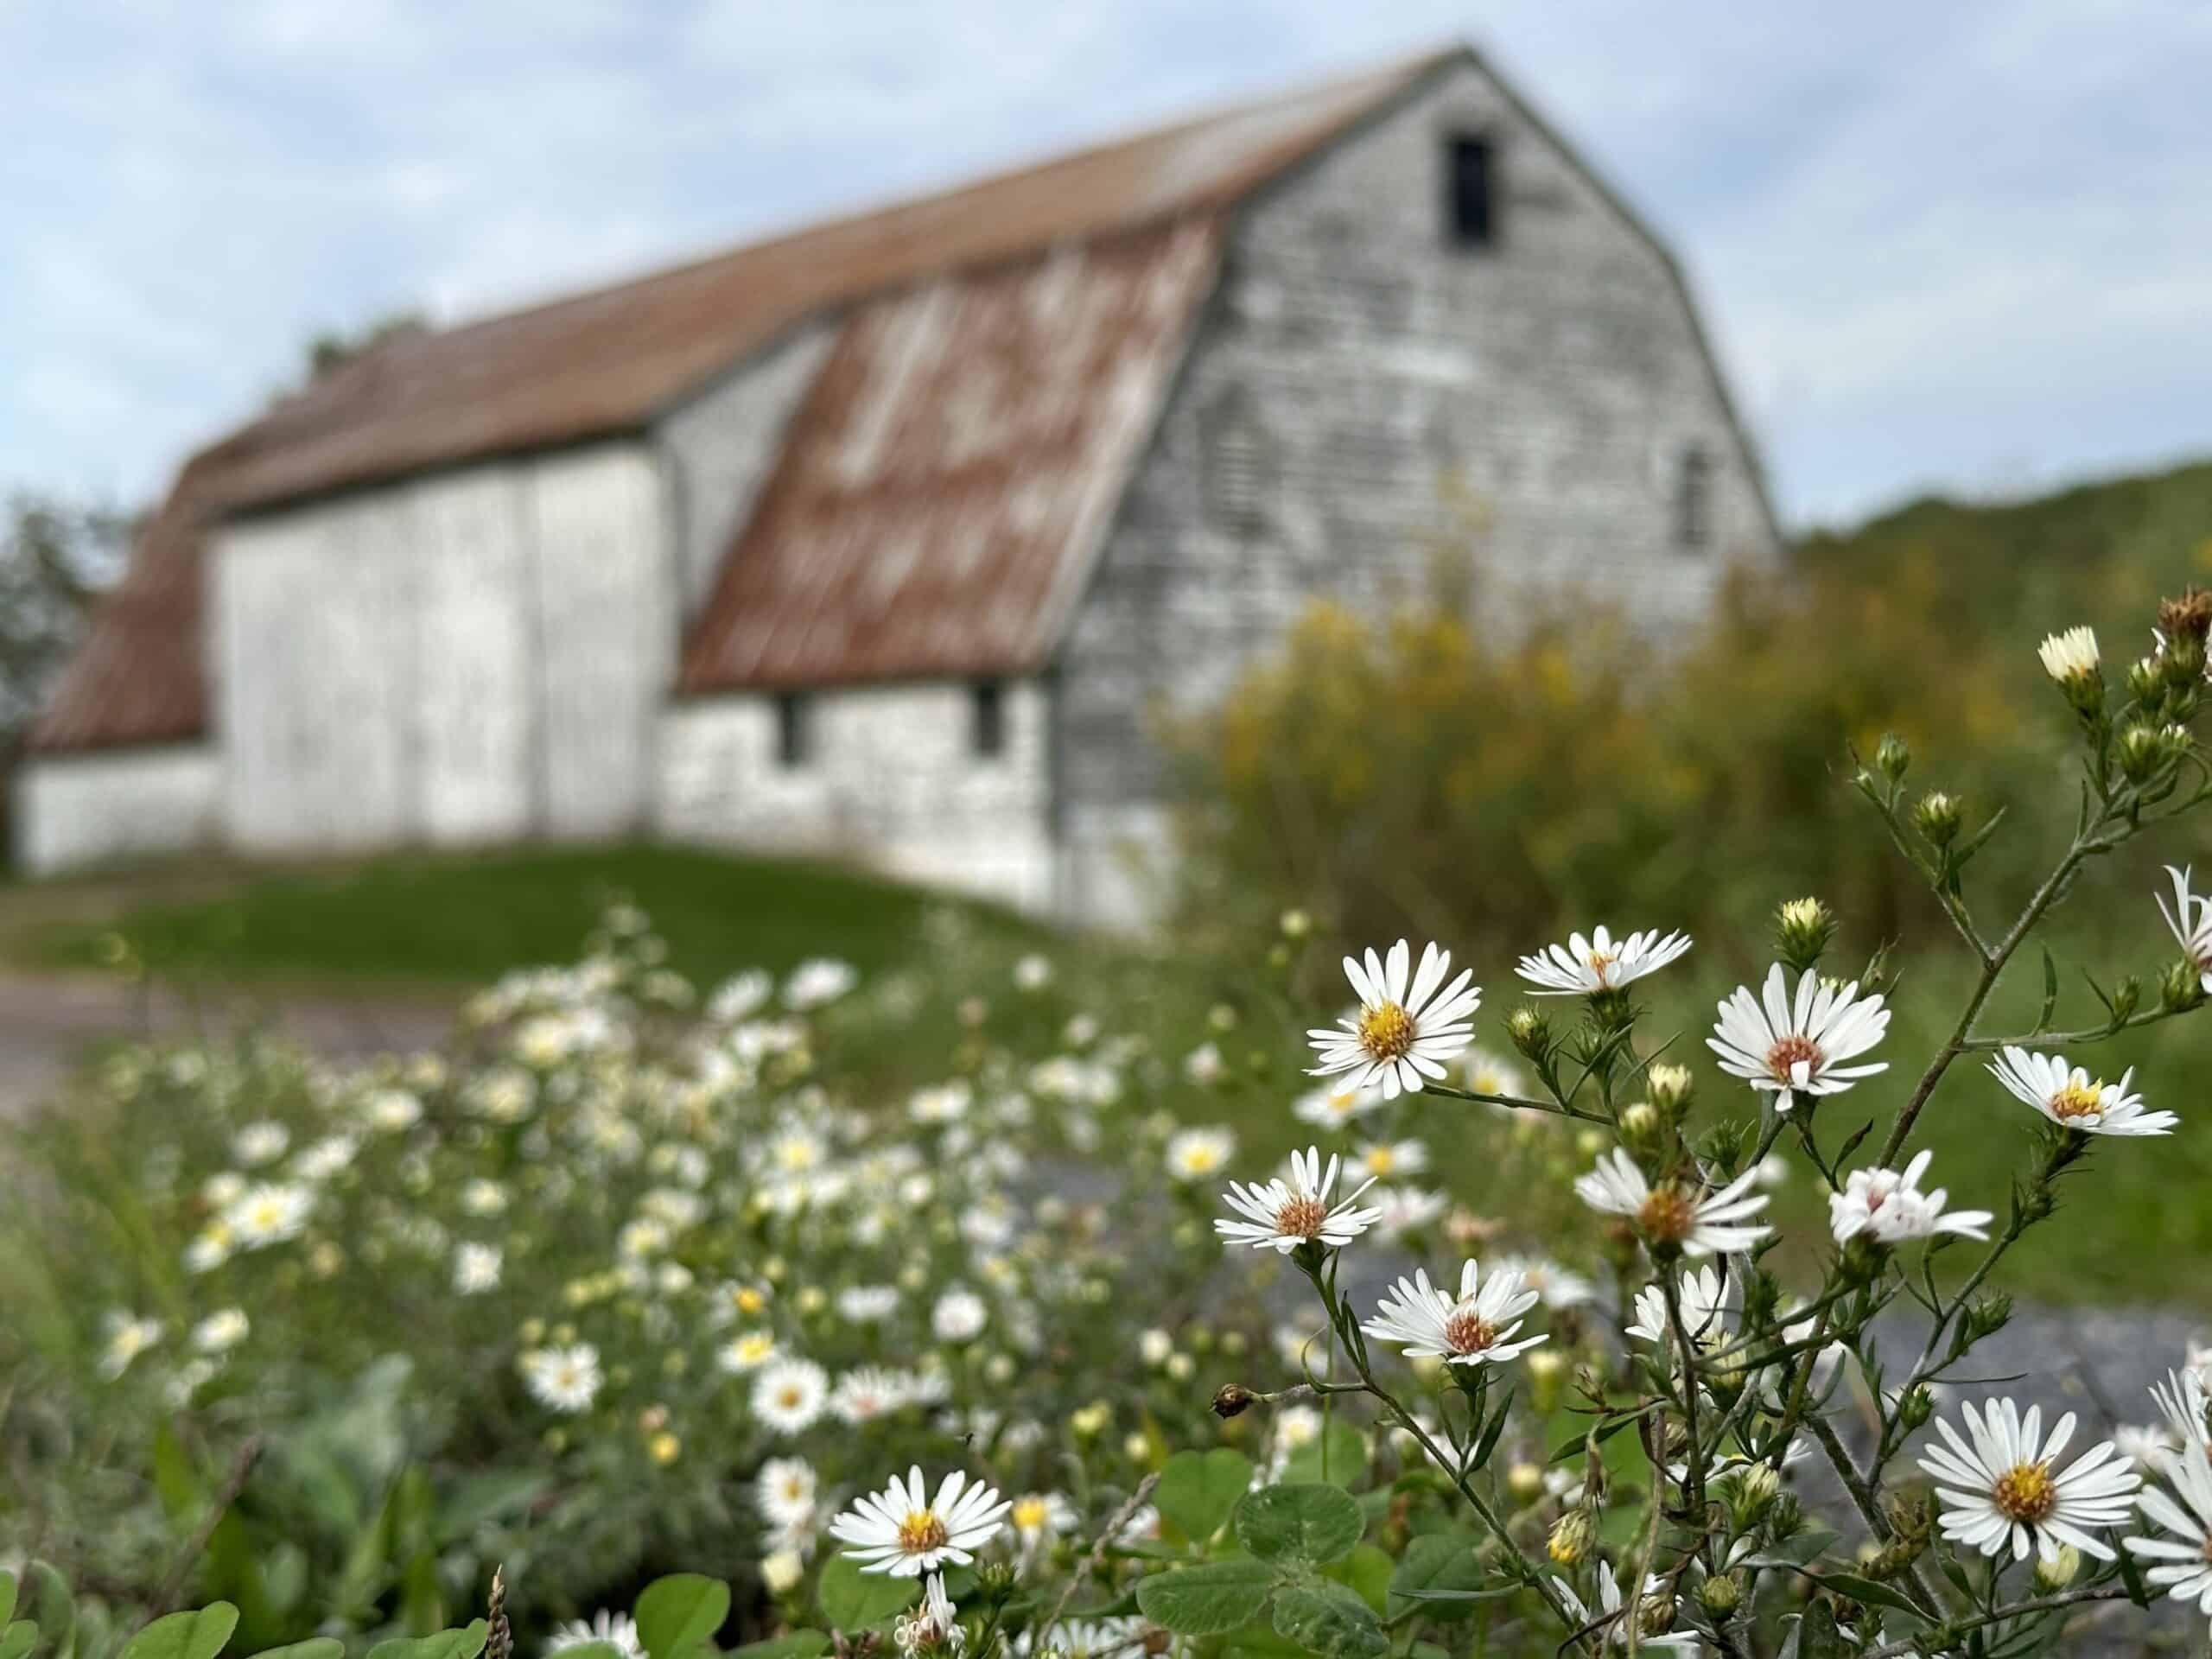 White asters blooming in the foreground with an old barn in the background